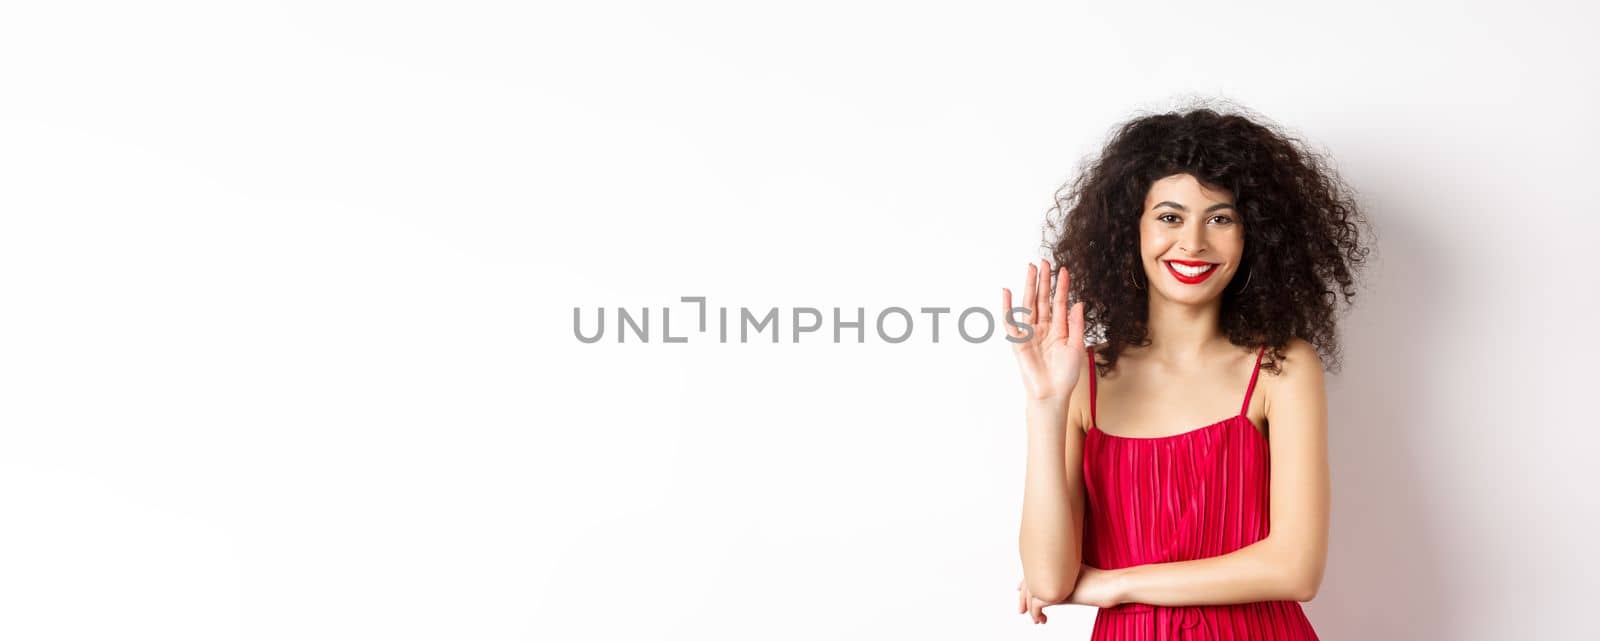 Cheerful elegant woman saying hello, waving hand and smiling at camera, greeting someone, standing in red dress on white background.